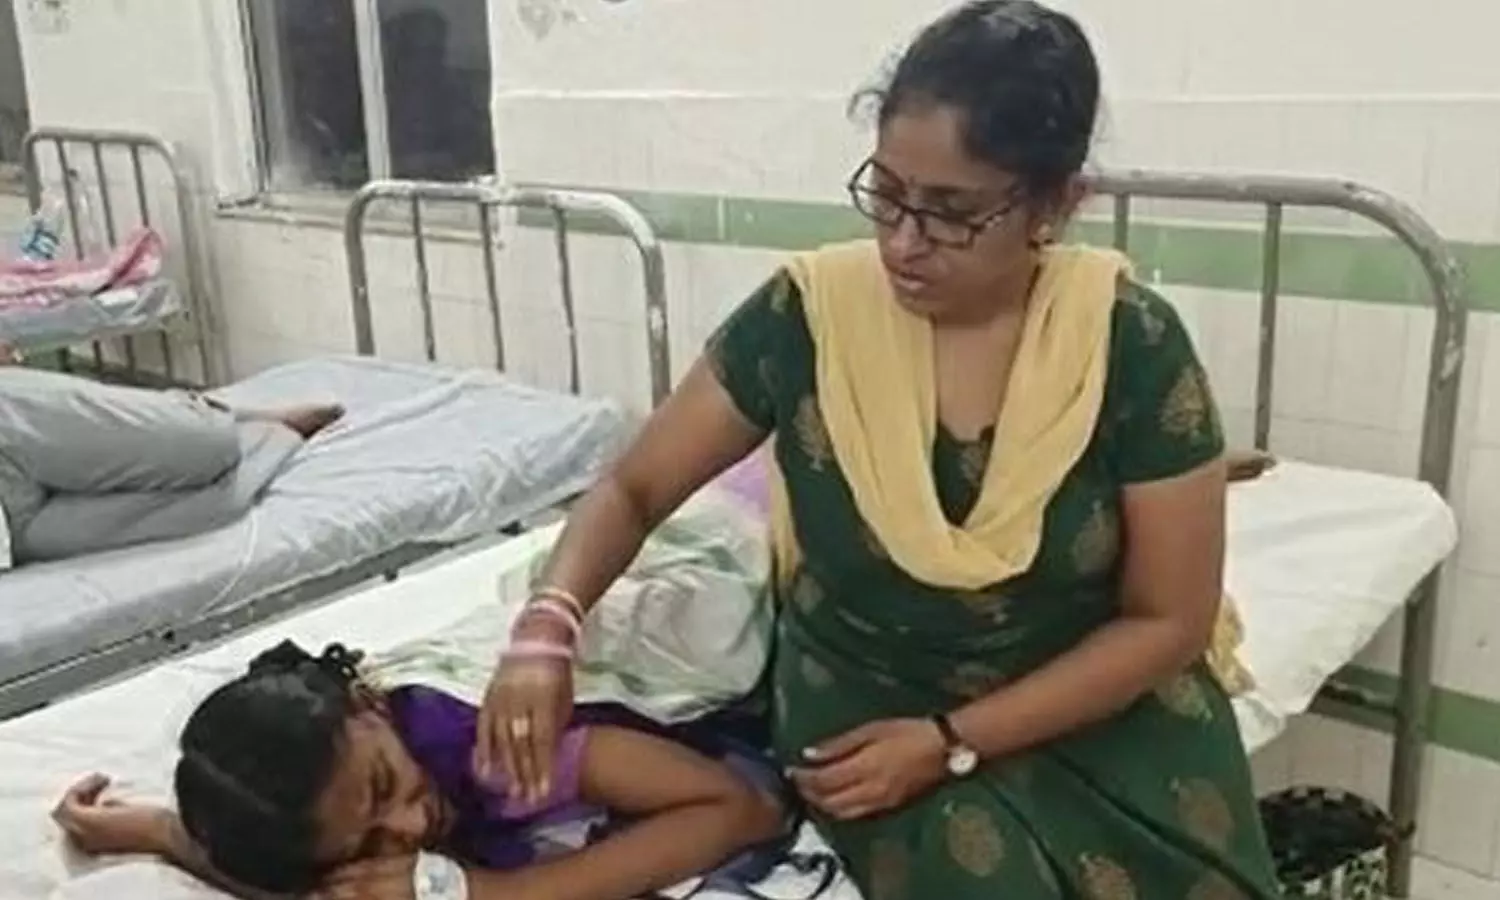 Minor girl injected with unknown drug, miscreants flee as she faints